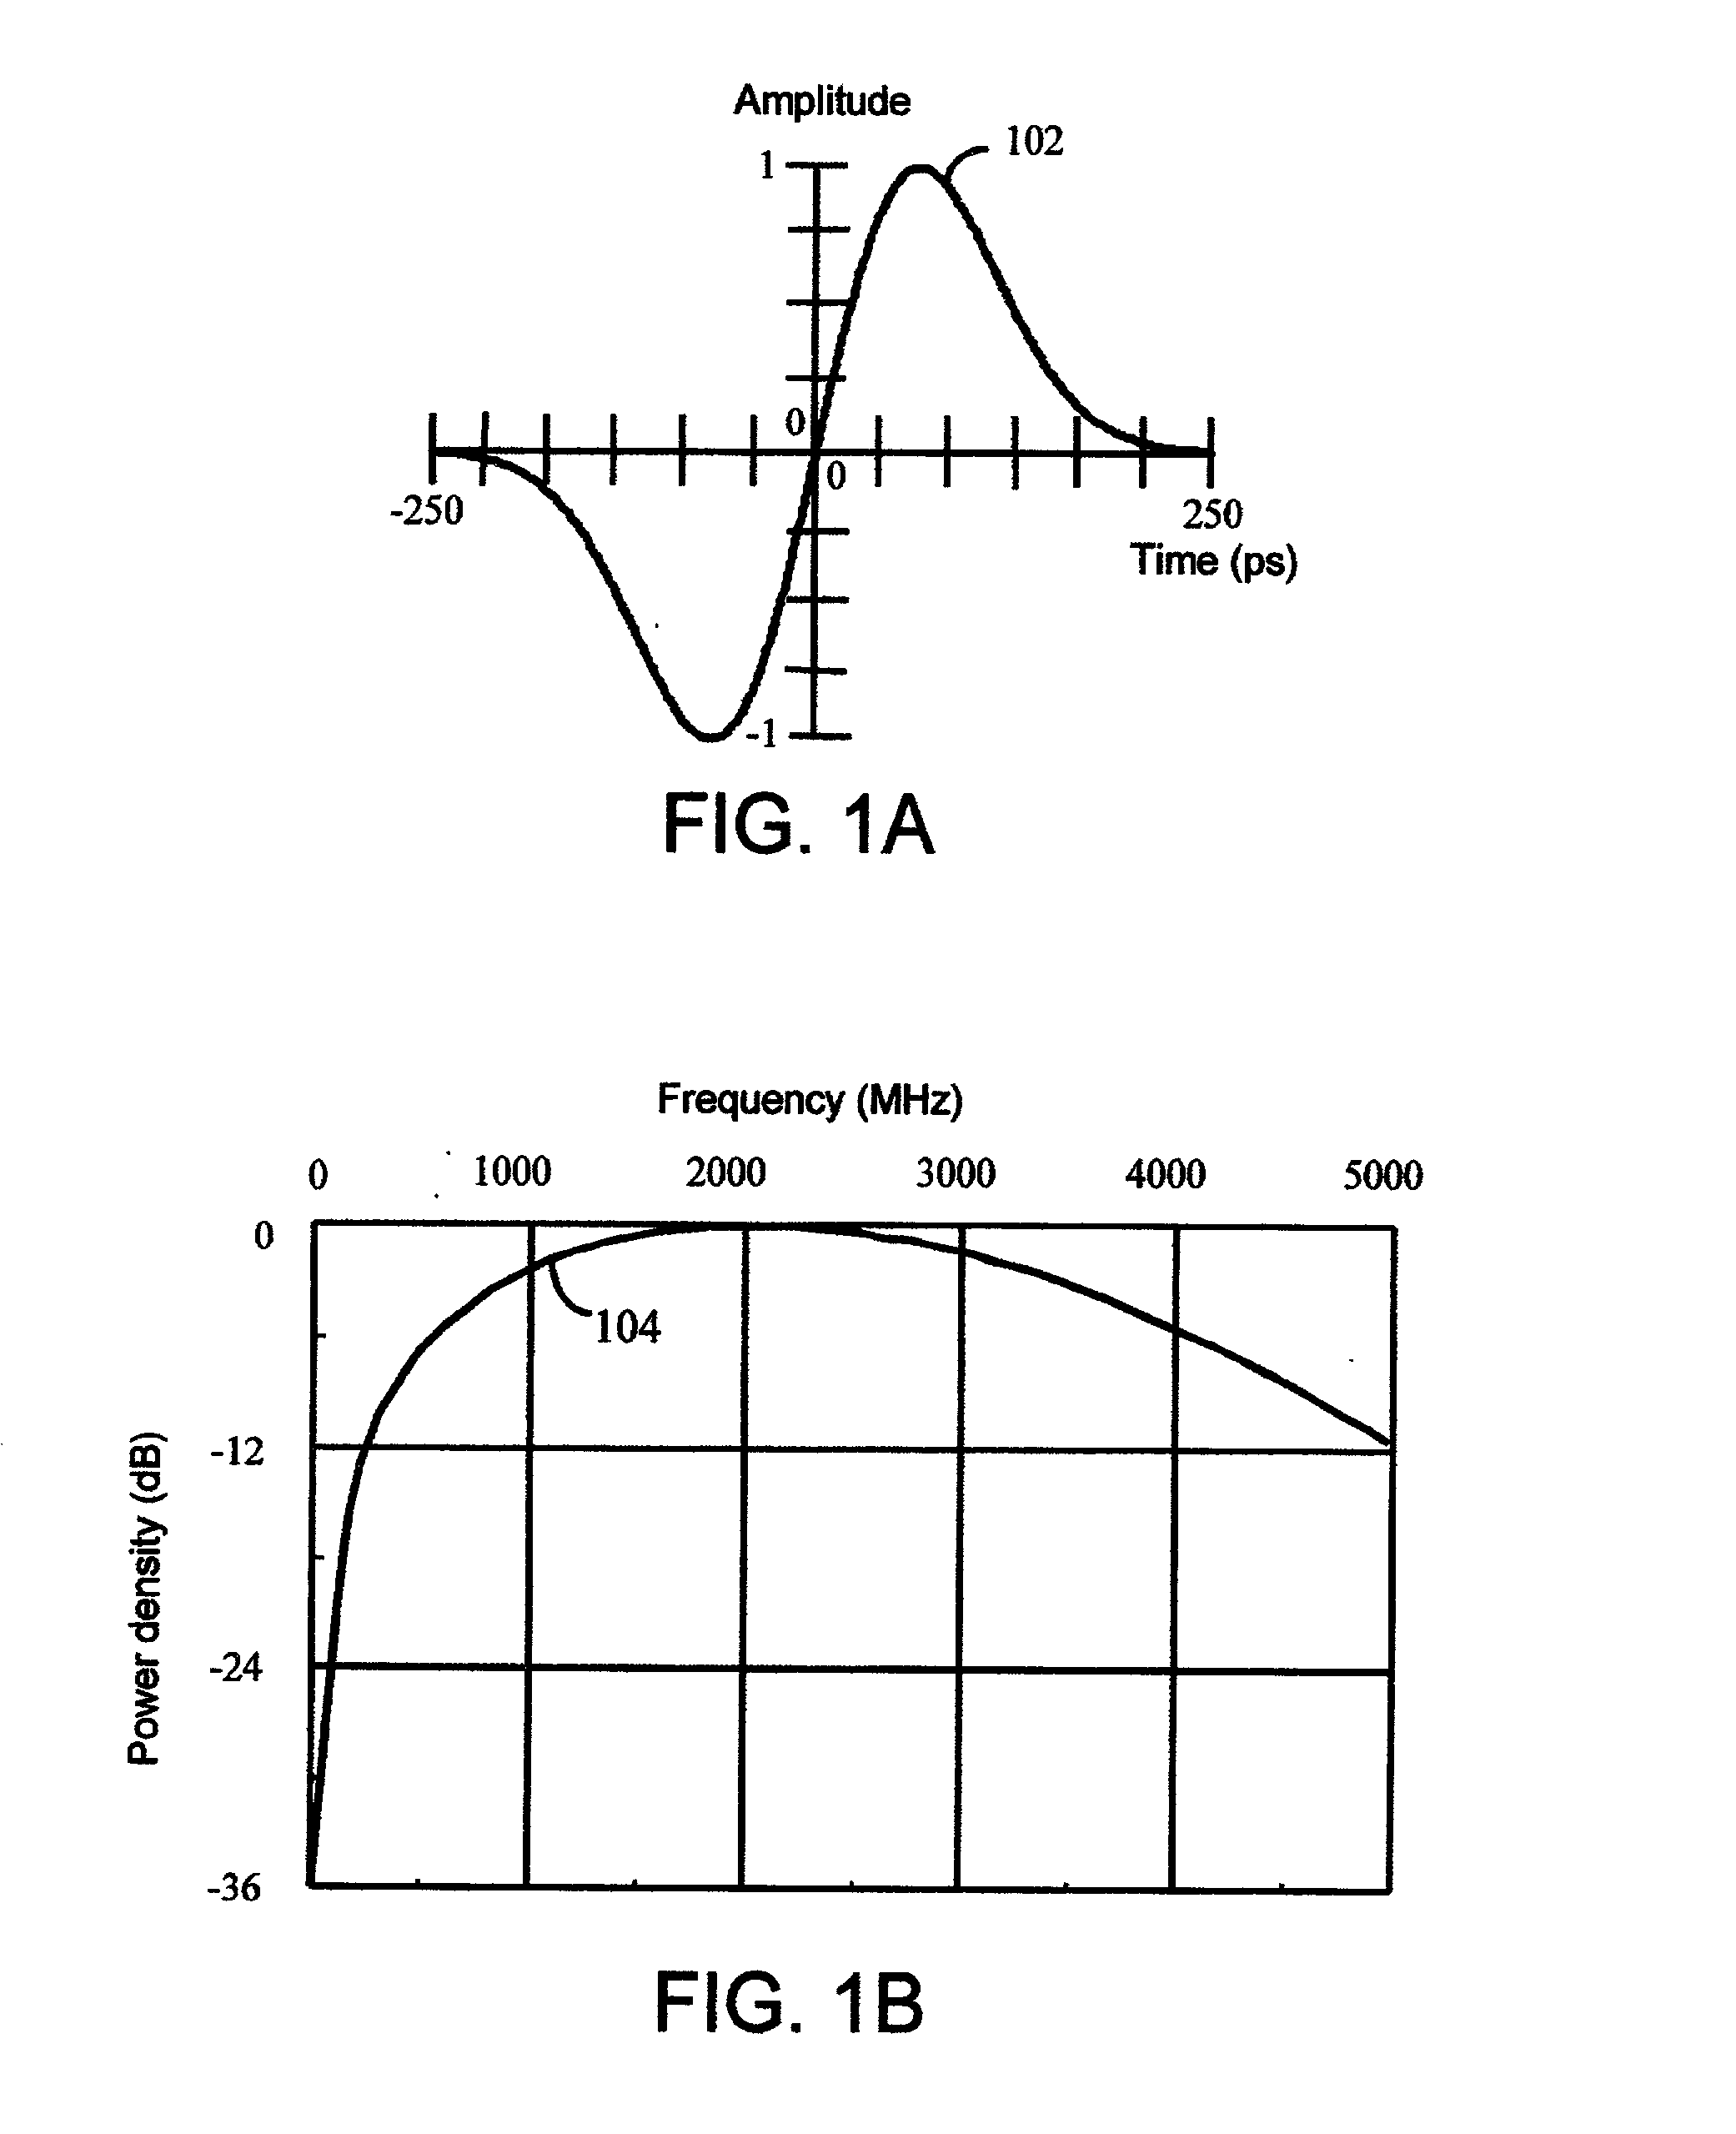 Ultra wideband antenna having frequency selectivity